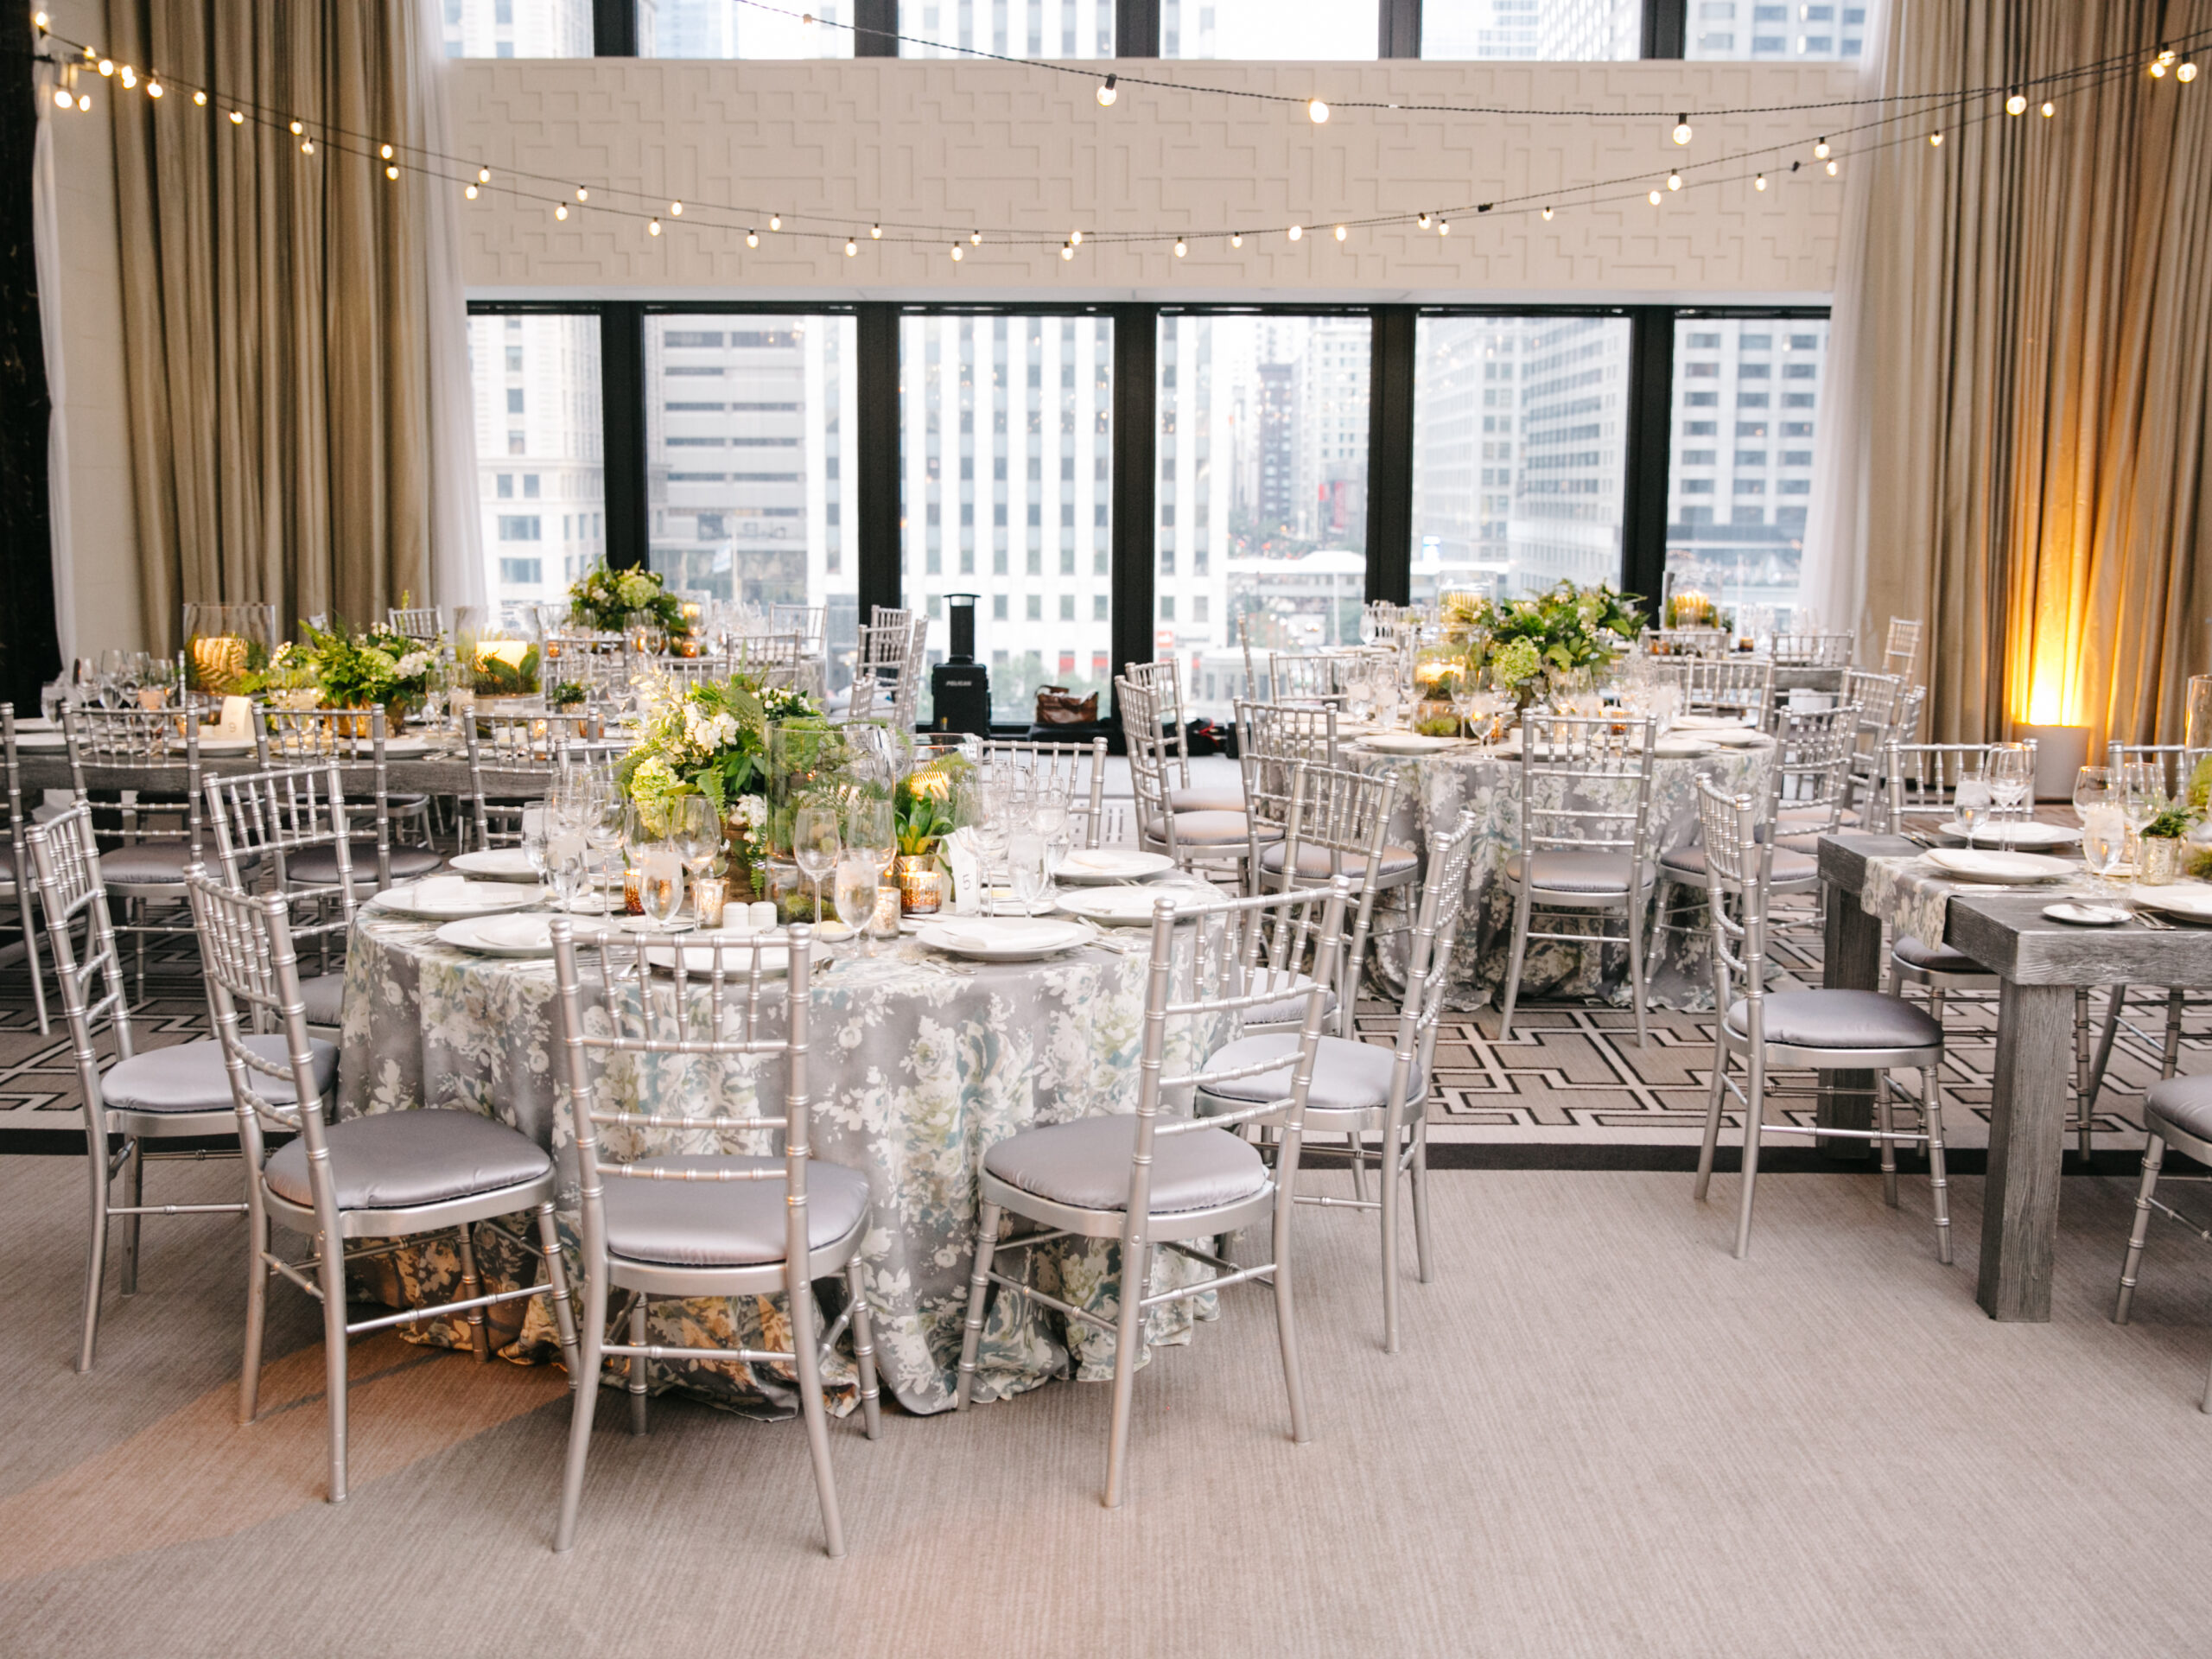 Party, KEHOE DESIGNS, Groom, I do, Engaged, Grooms Perspective, For The Men, Wedding Day, Wedding Advice, Bride and Groom Event Design, Modern Wedding, Chicago, The Langham, Green Wedding, Event Decor